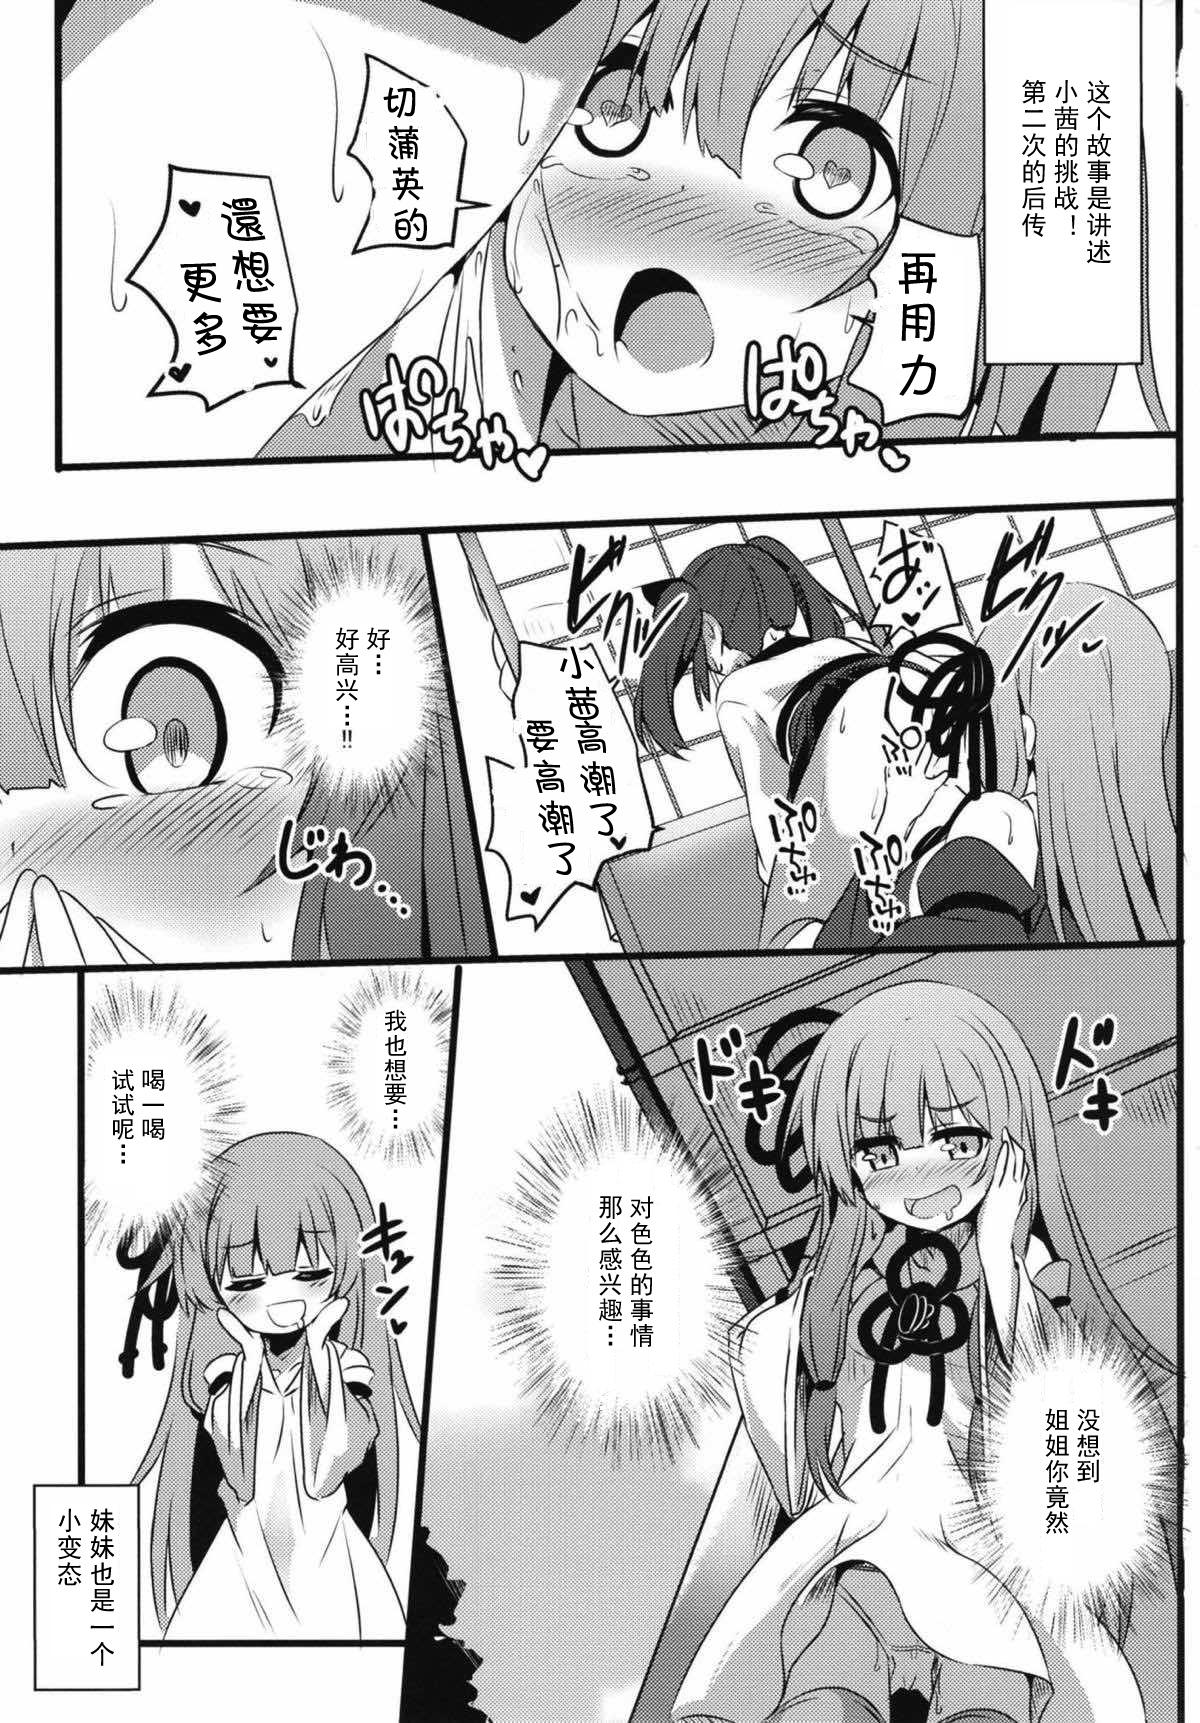 Jerkoff (Kotonoha's Festa 2) [Milk Pudding (Jamcy)] Akane-chan Challenge! 2.5-kaime (VOICEROID) [Chinese] [古早个人汉化] - Voiceroid Hard Cock - Page 3